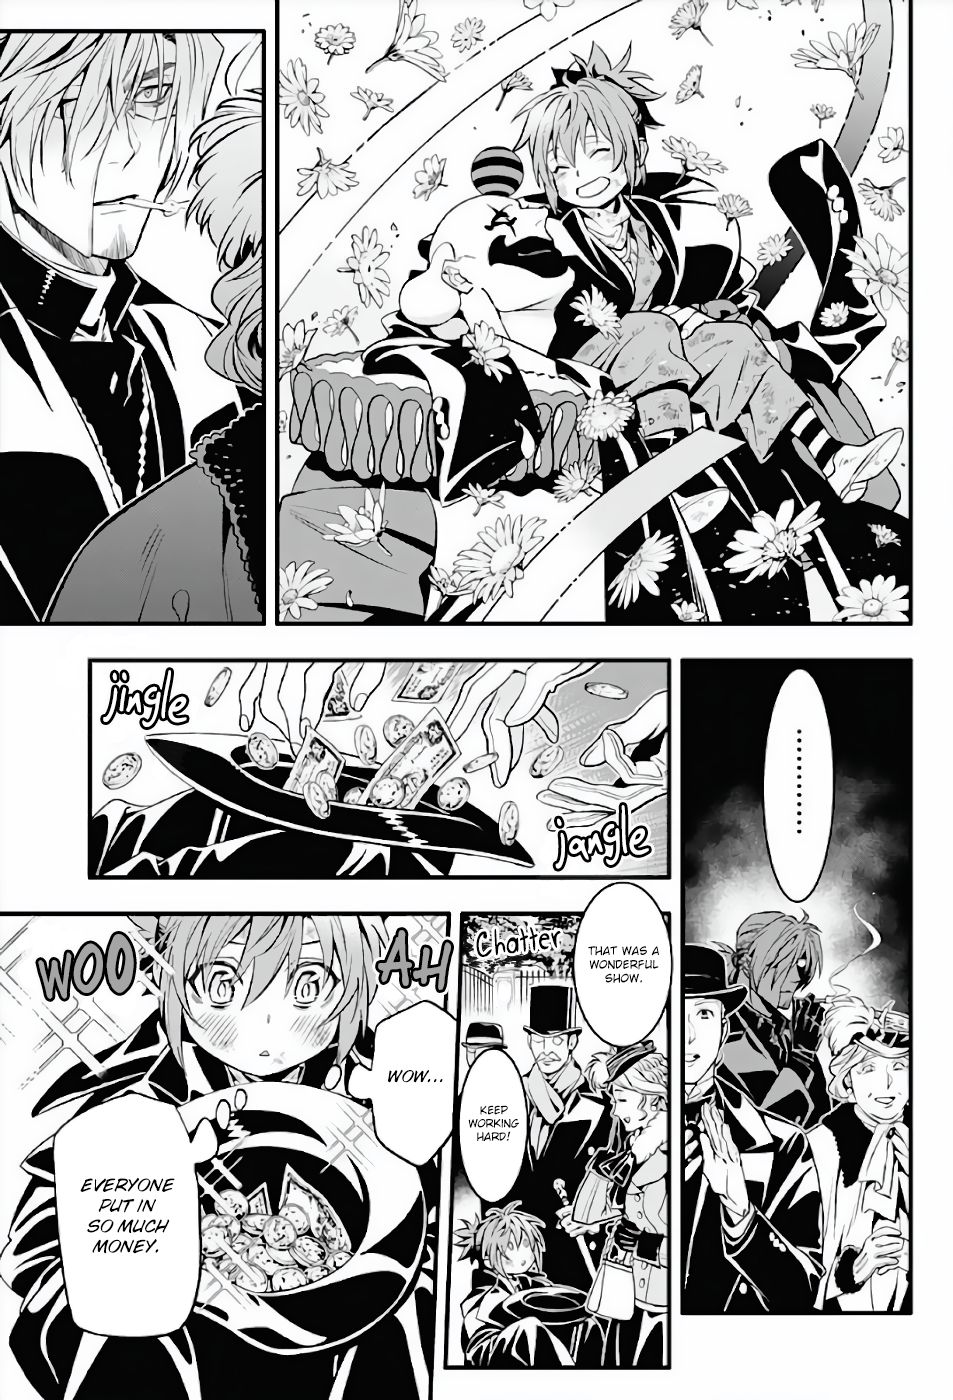 D.Gray-man chapter 237 page 7